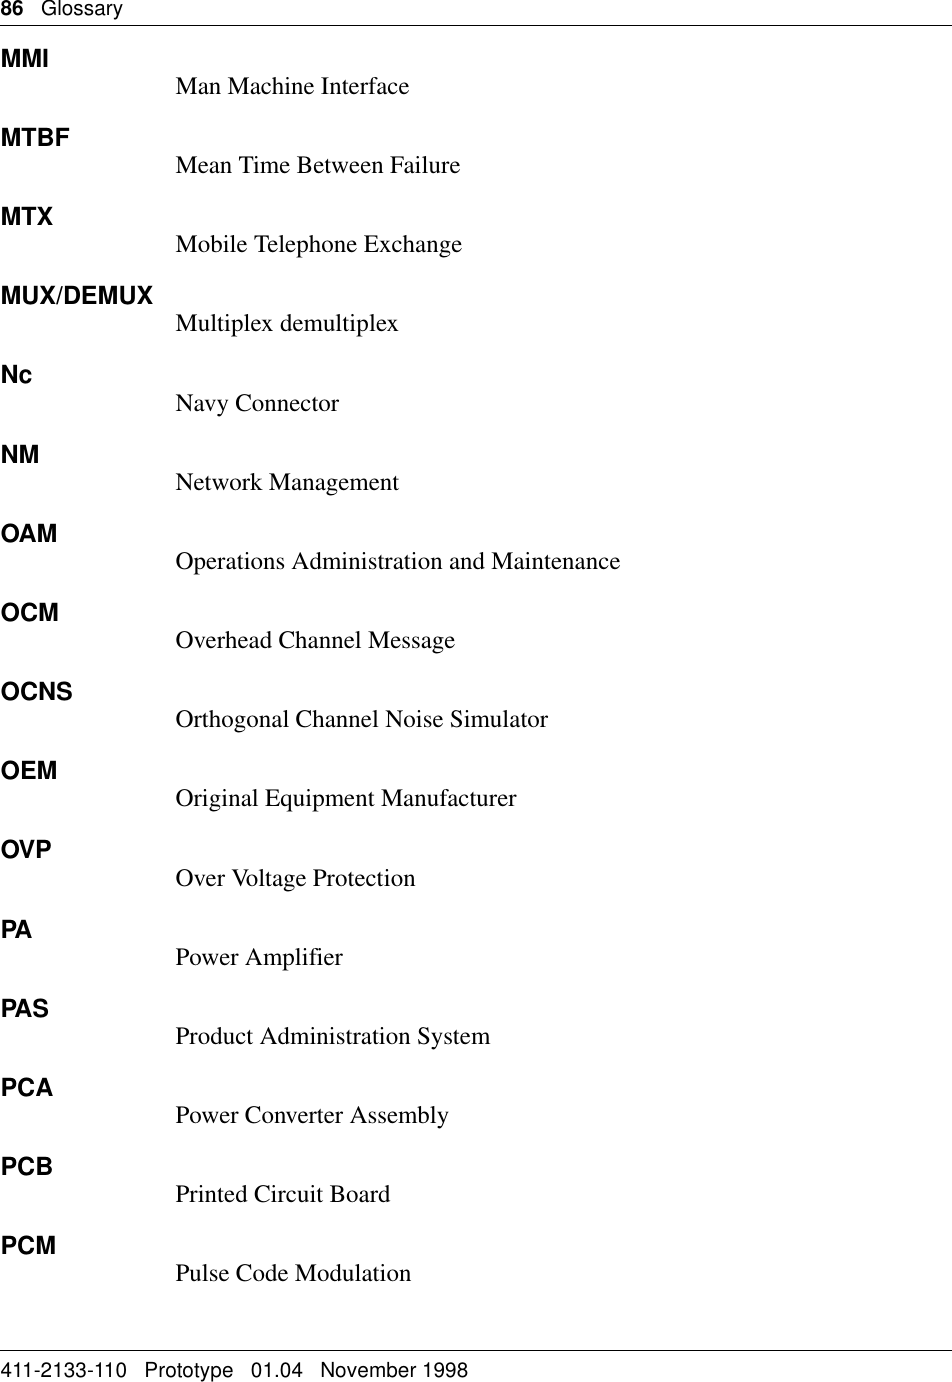 86   Glossary411-2133-110   Prototype   01.04   November 1998MMI Man Machine InterfaceMTBF Mean Time Between FailureMTX Mobile Telephone ExchangeMUX/DEMUX Multiplex demultiplexNc Navy ConnectorNM Network ManagementOAM Operations Administration and MaintenanceOCM Overhead Channel MessageOCNS Orthogonal Channel Noise SimulatorOEM Original Equipment ManufacturerOVP Over Voltage ProtectionPA Power AmplifierPAS Product Administration SystemPCA Power Converter AssemblyPCB Printed Circuit BoardPCM Pulse Code Modulation